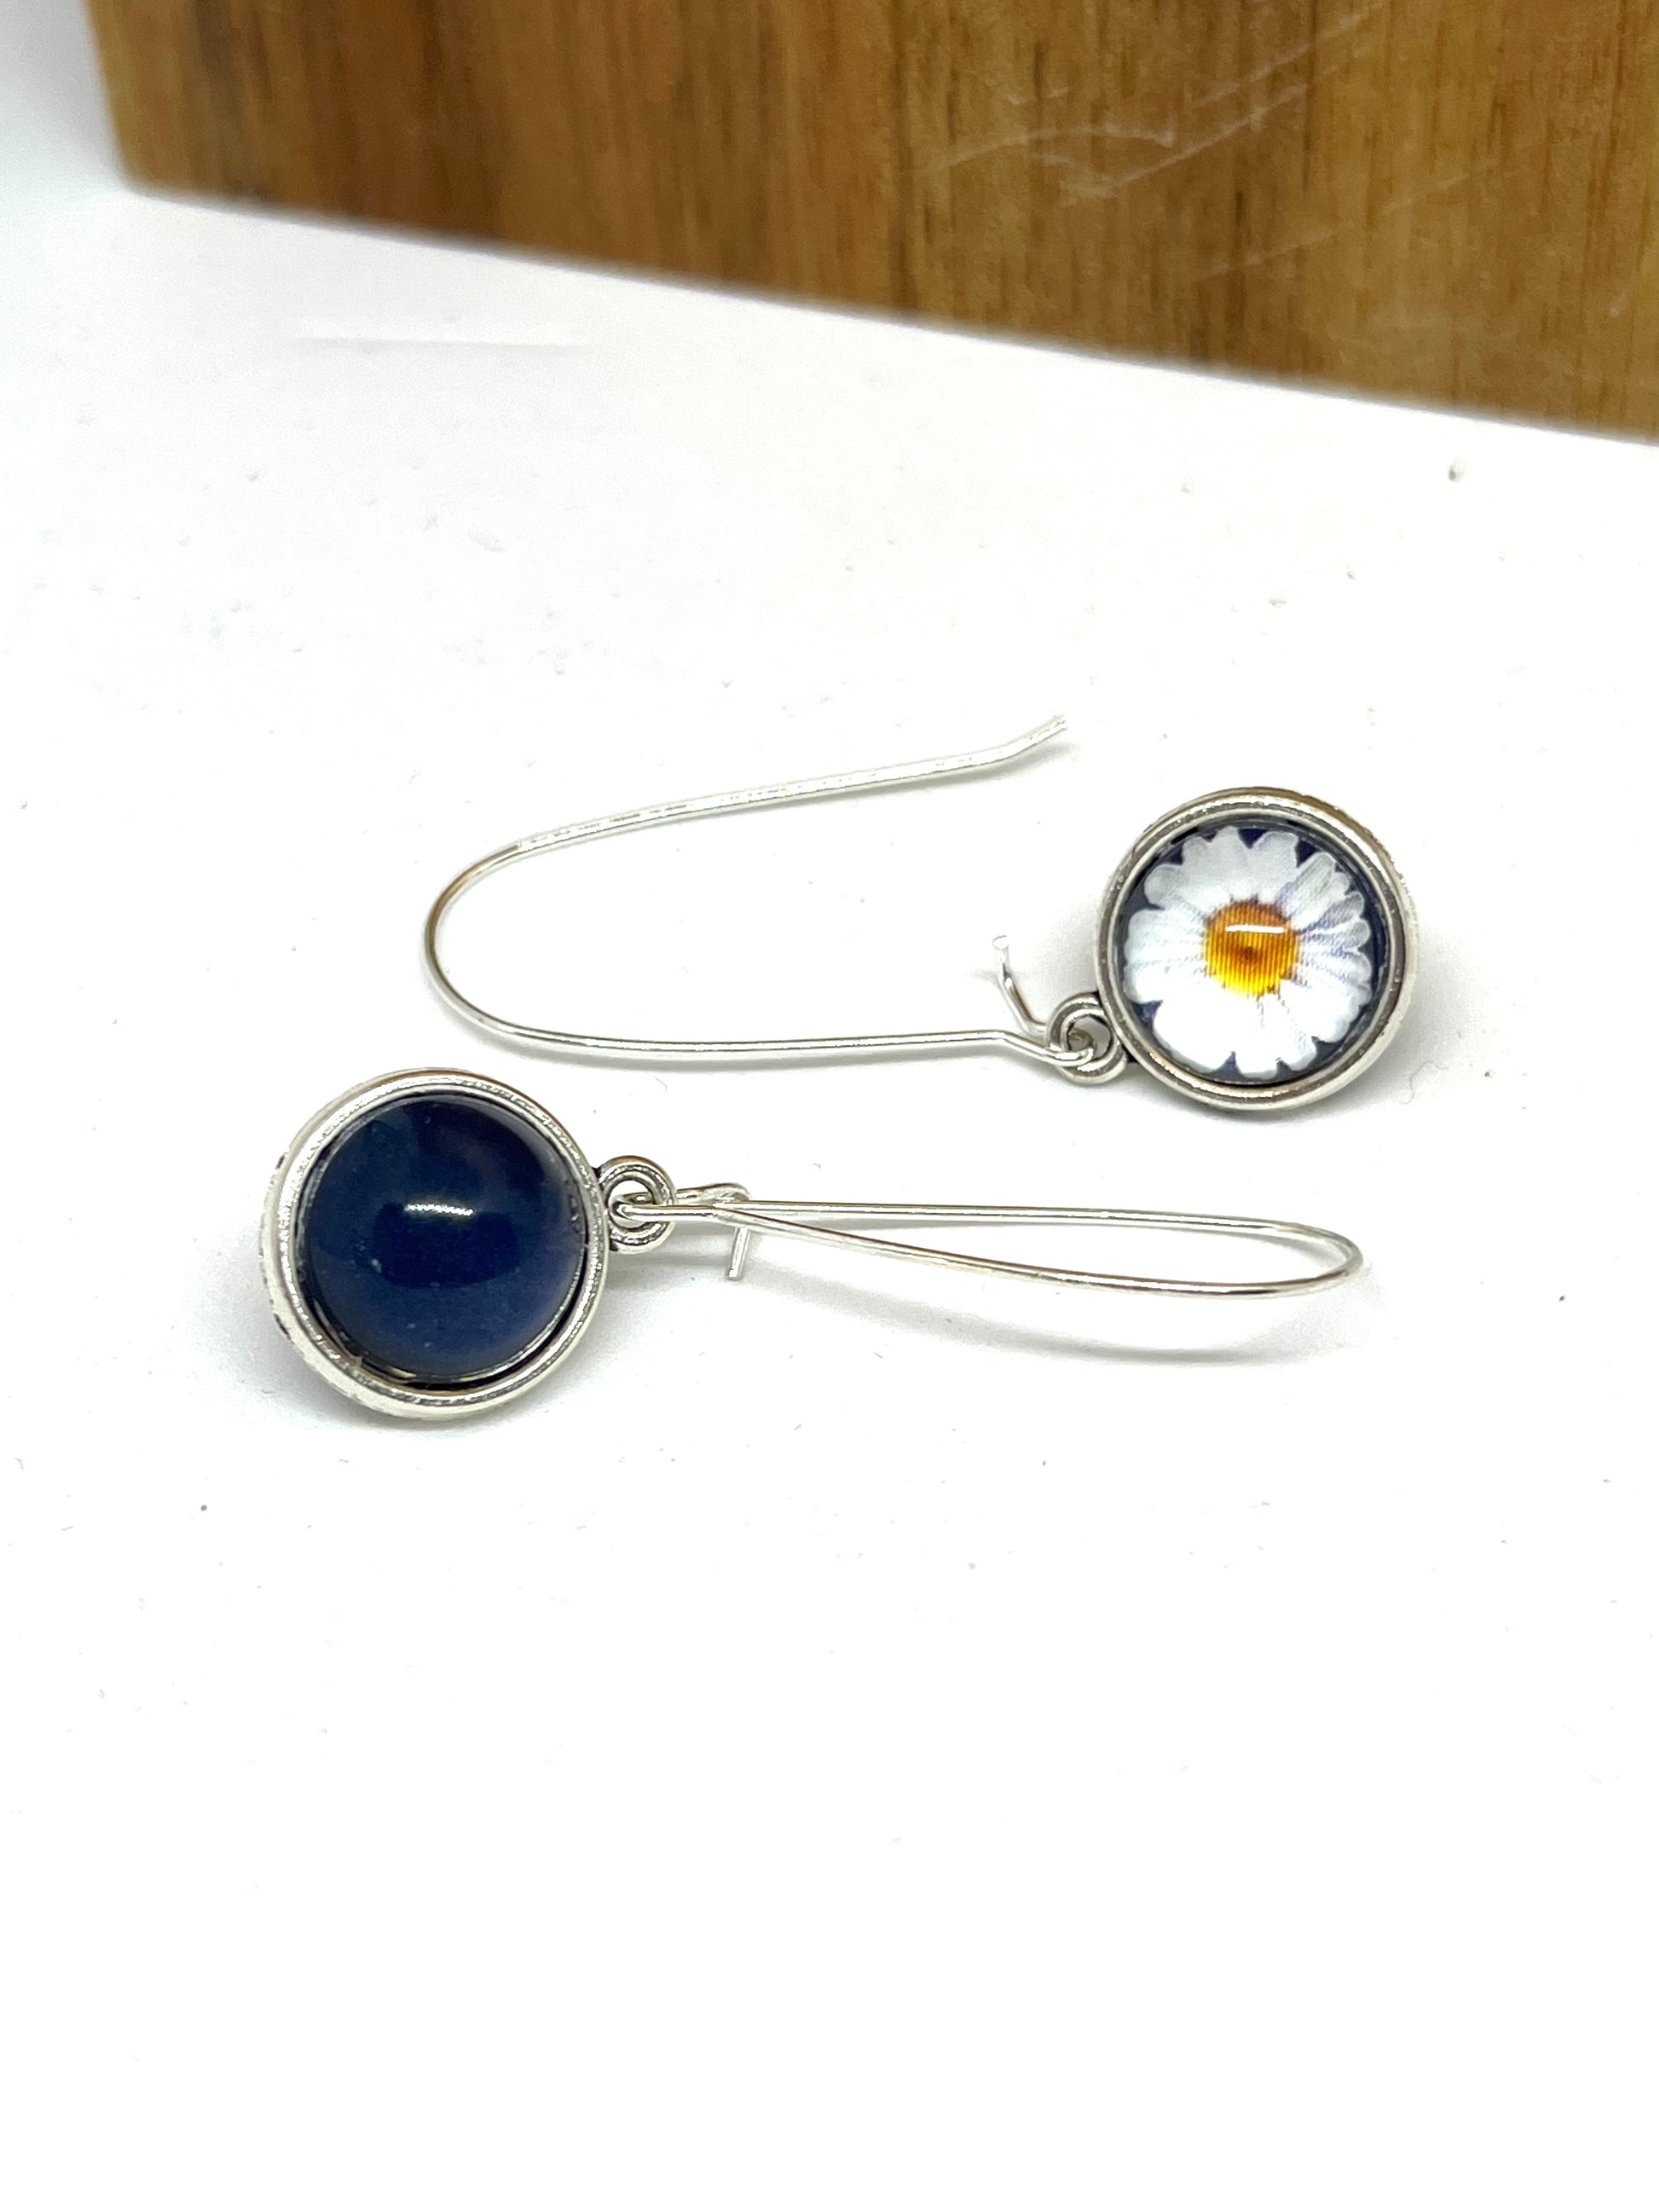 Double sided glass dome earrings with navy on one side and a white daisy with navy background on the other